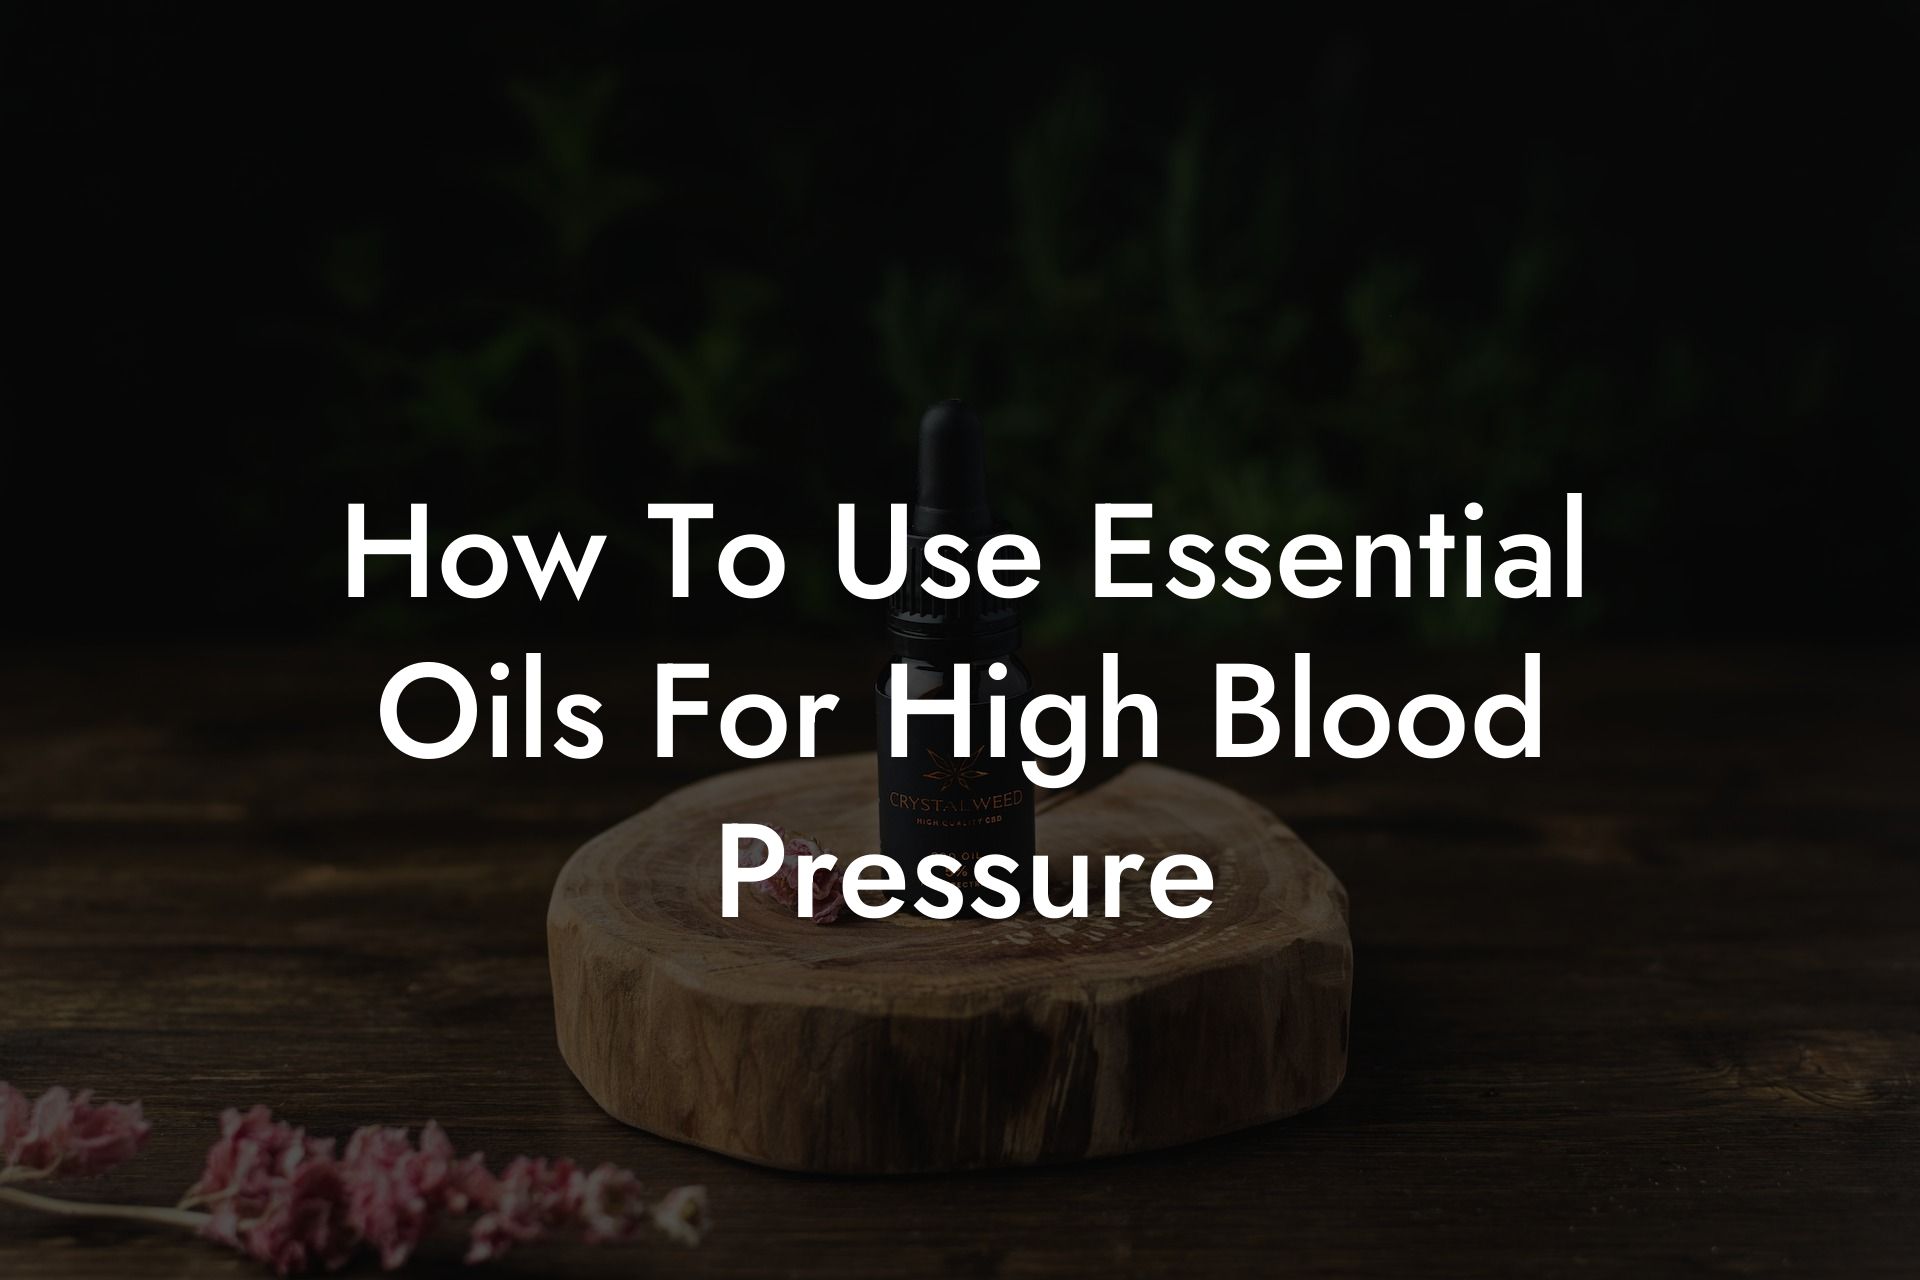 How To Use Essential Oils For High Blood Pressure